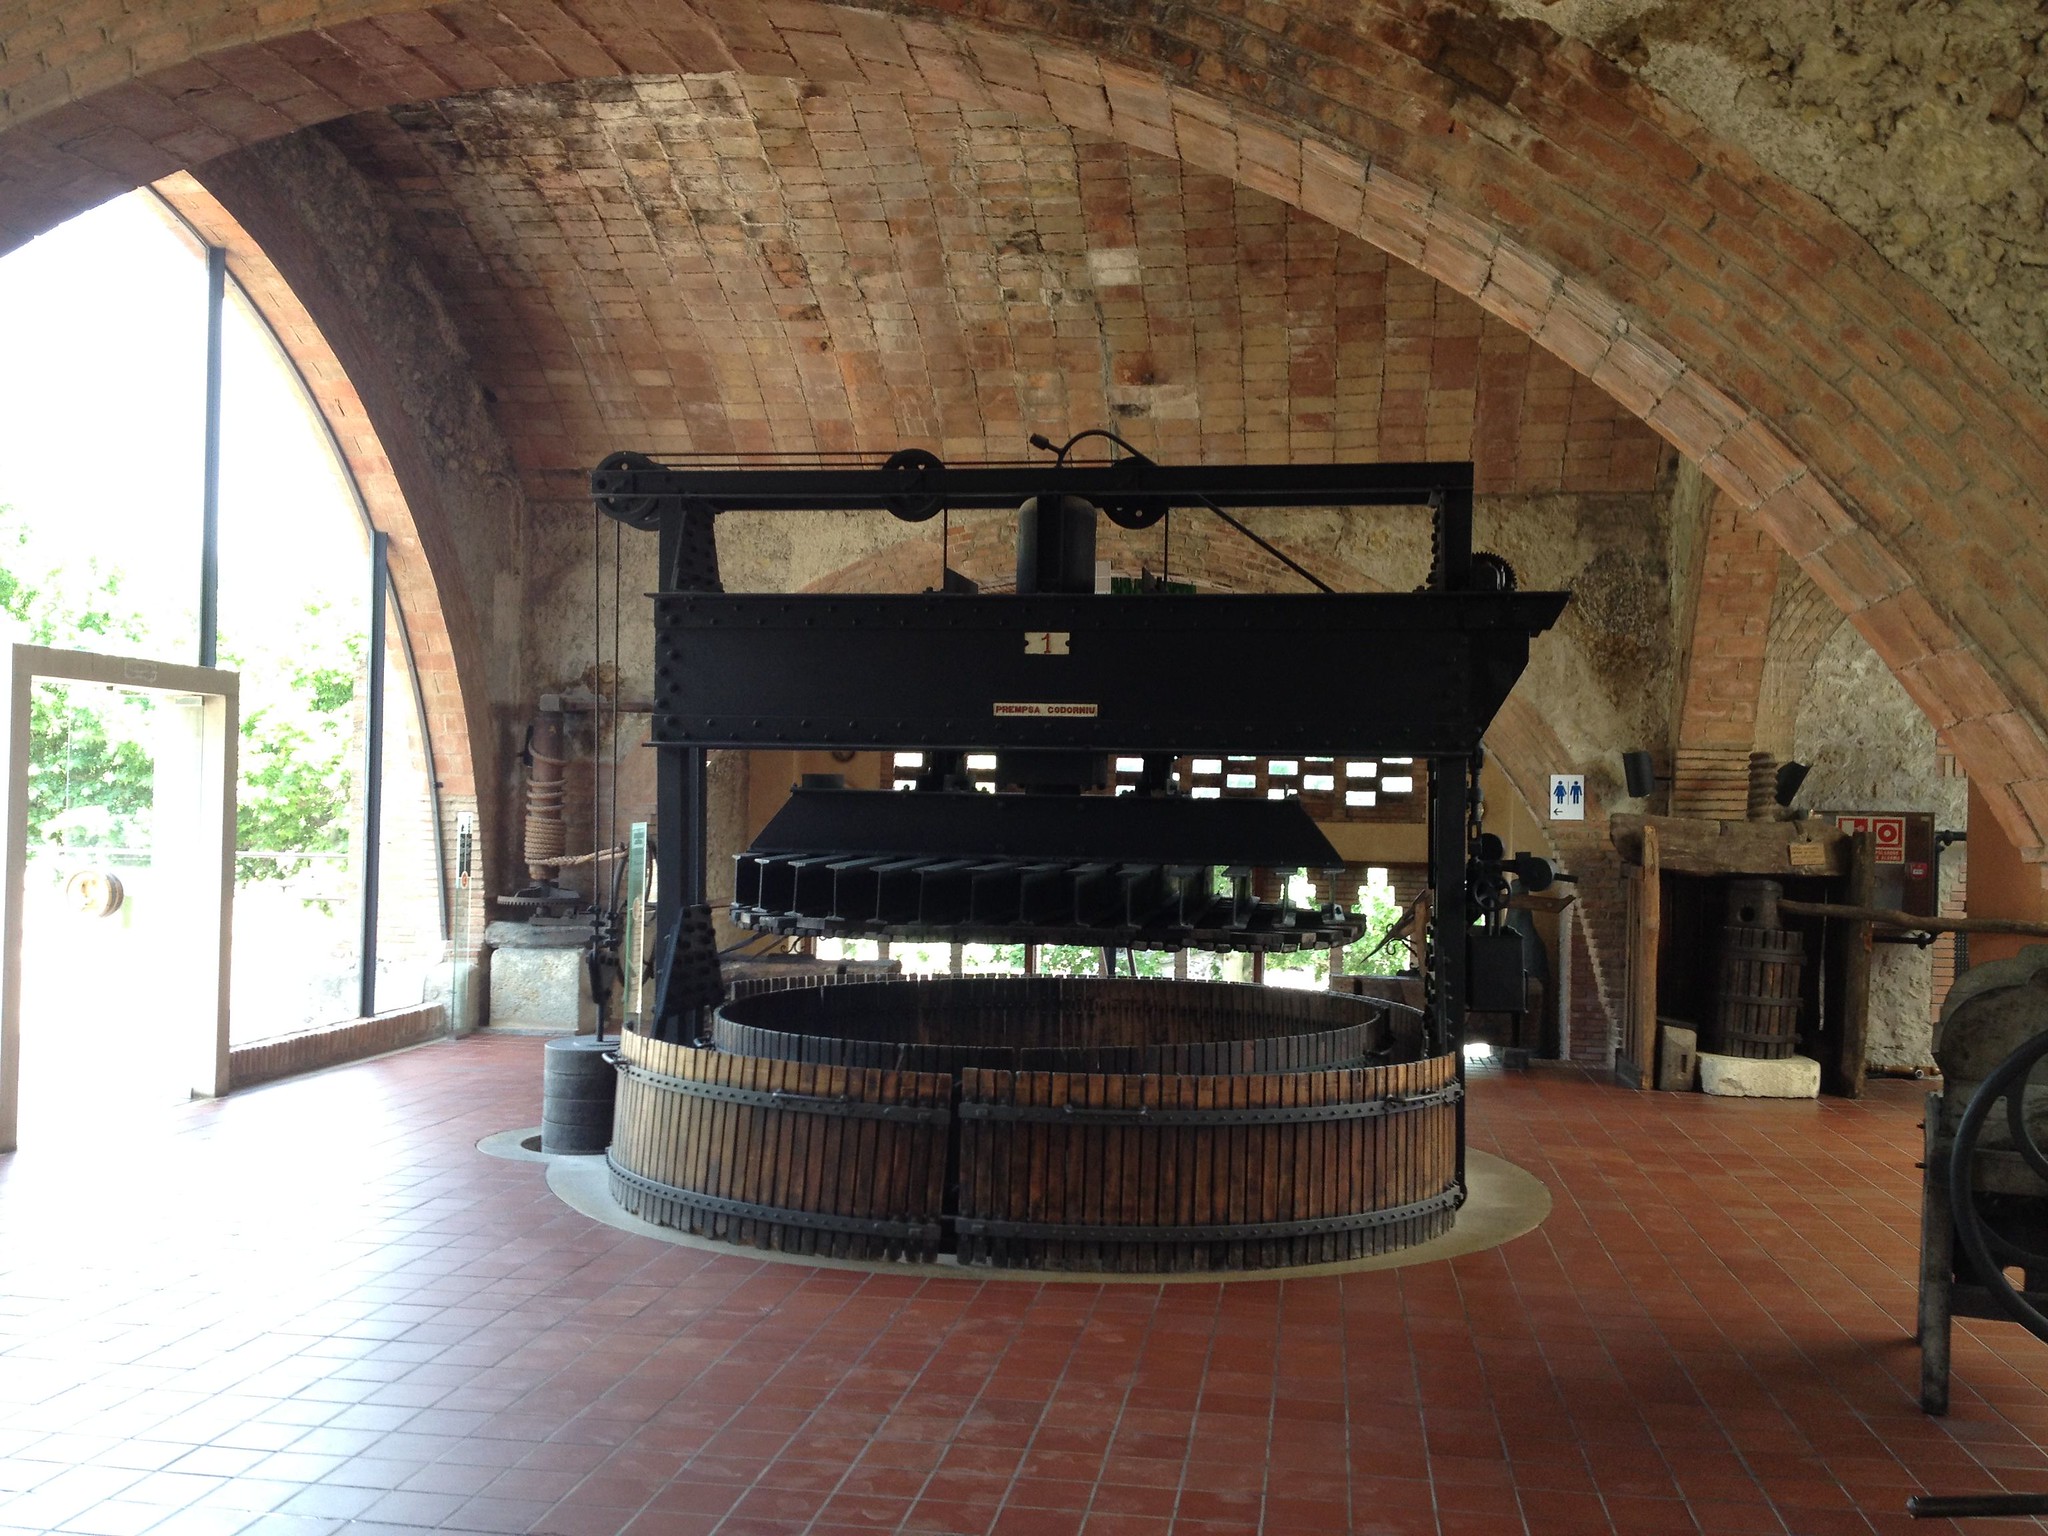 Winemaking equipment in Codorníu, the oldest producer of Cava (photo: Megan Cole)